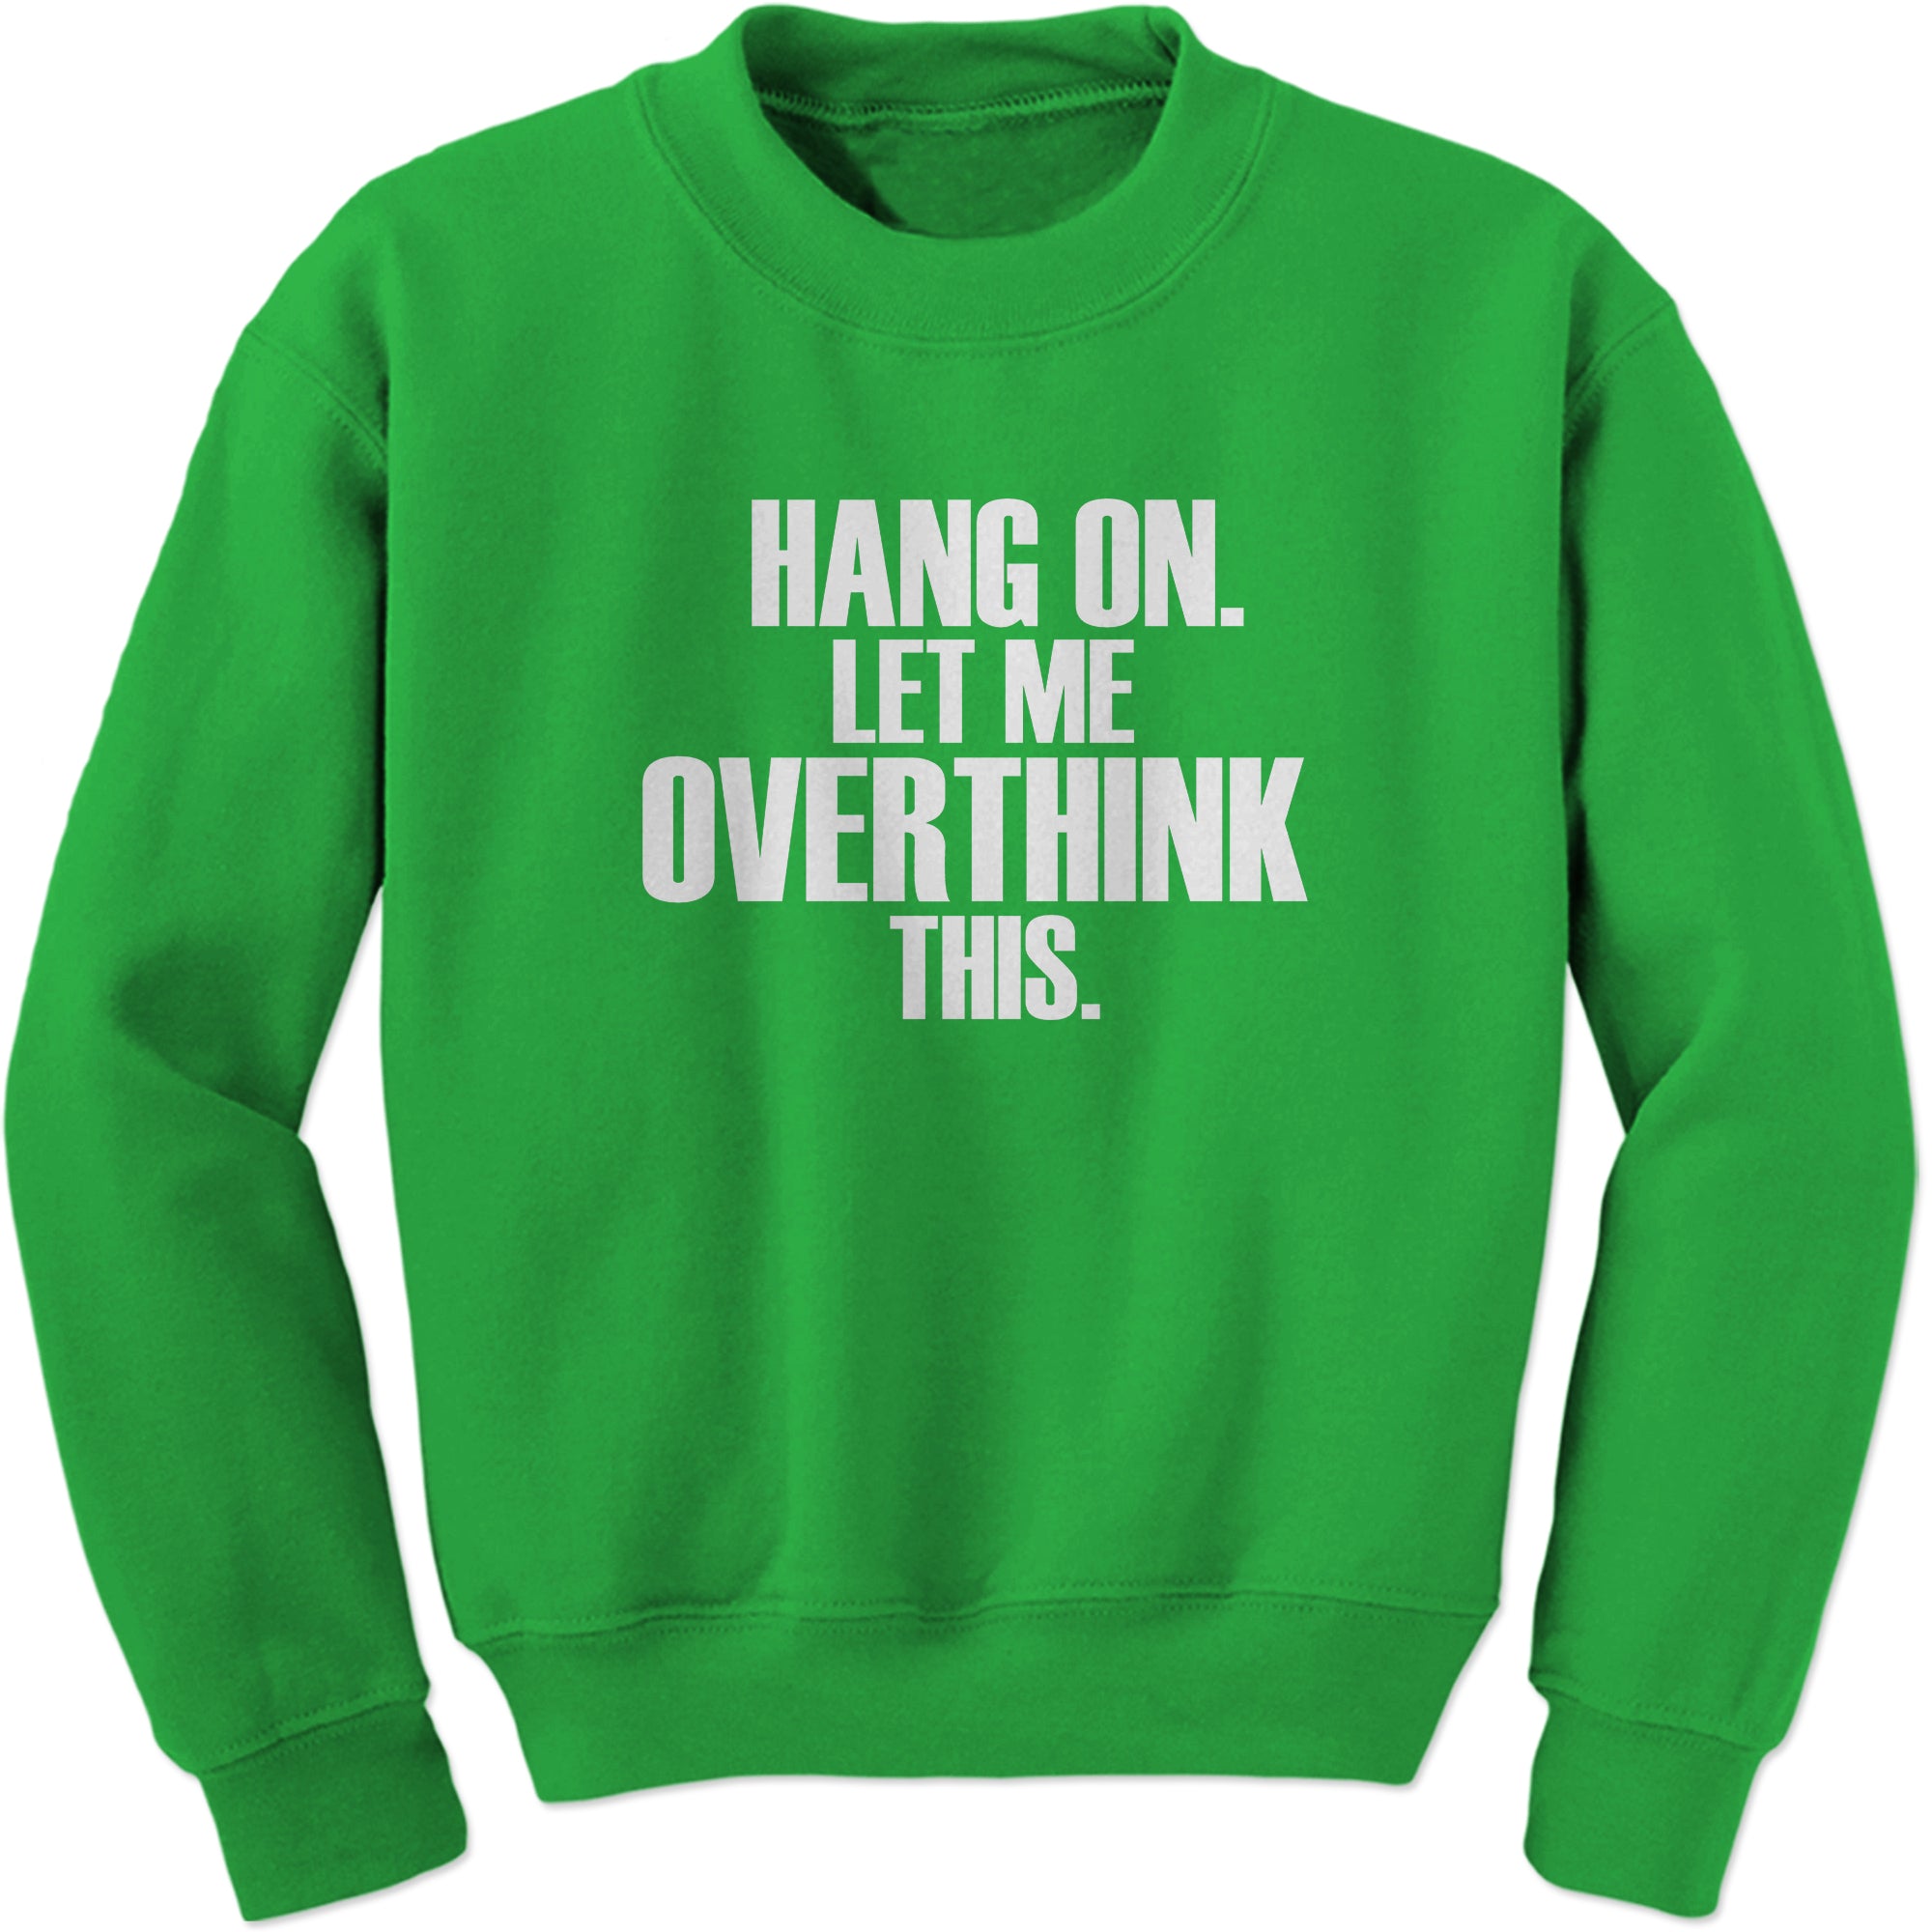 Hold on let me overthink this funny Sweatshirt